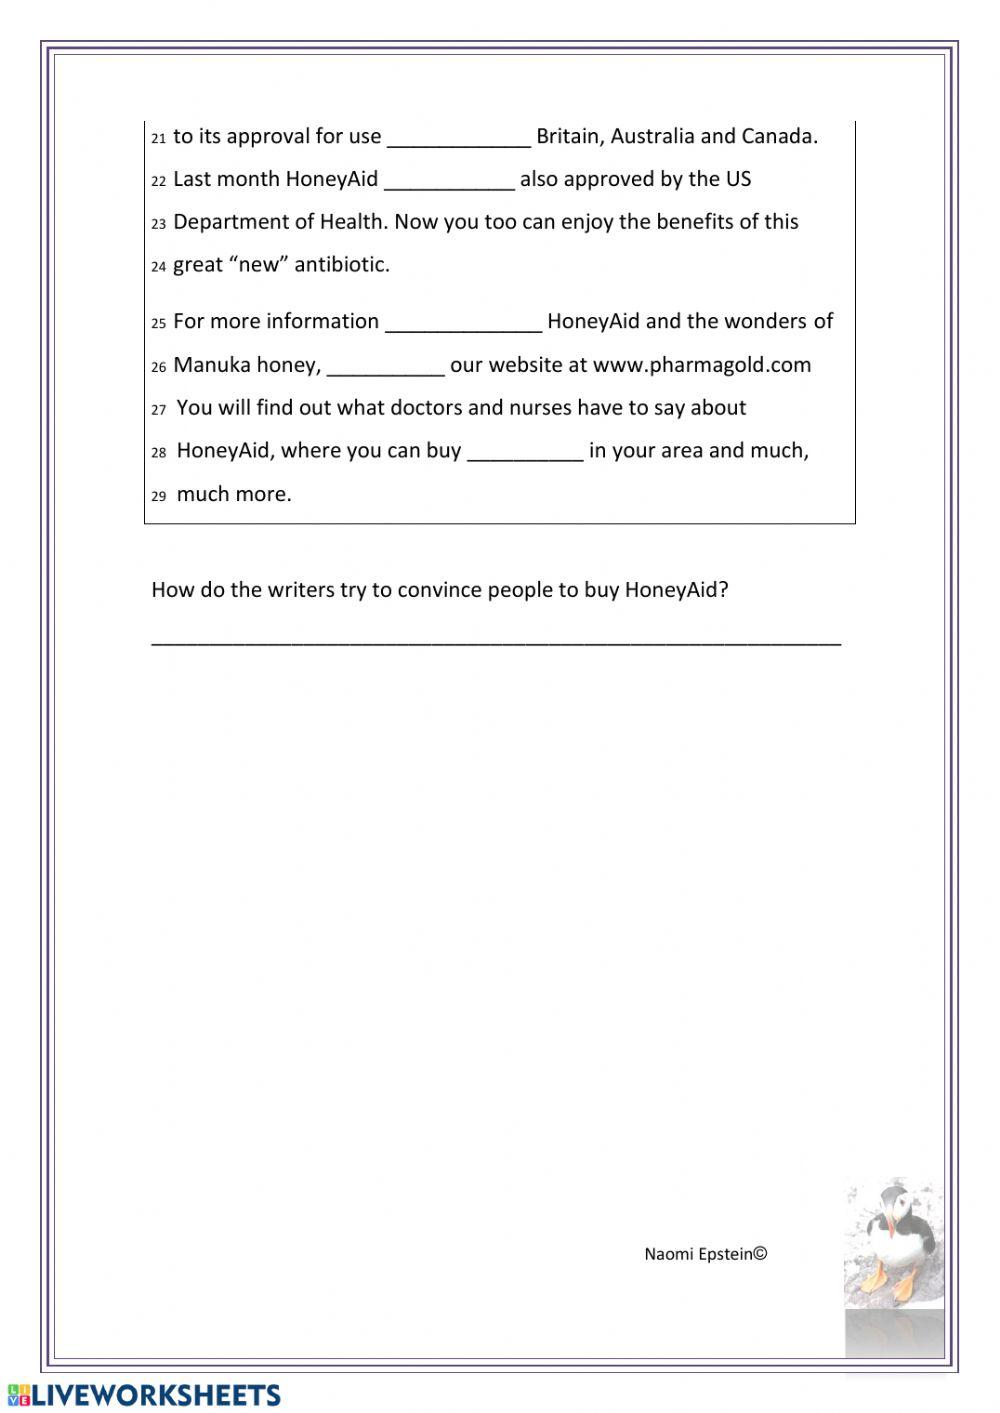 Guided Reading Task Part 4